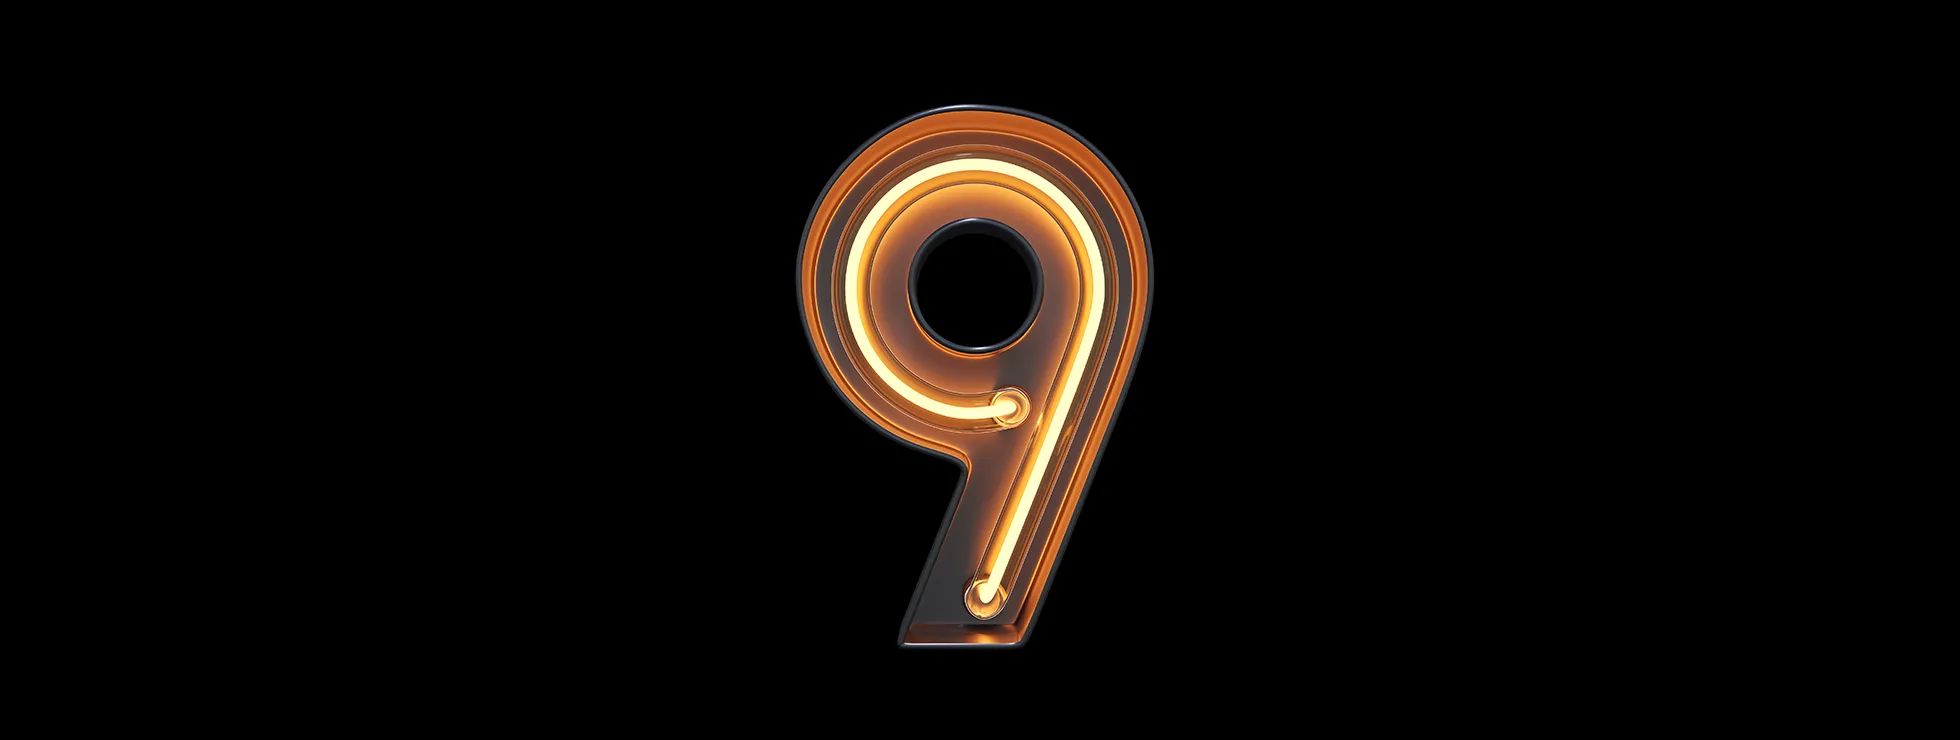 Number 9 shown as an orange neon sign on a black background